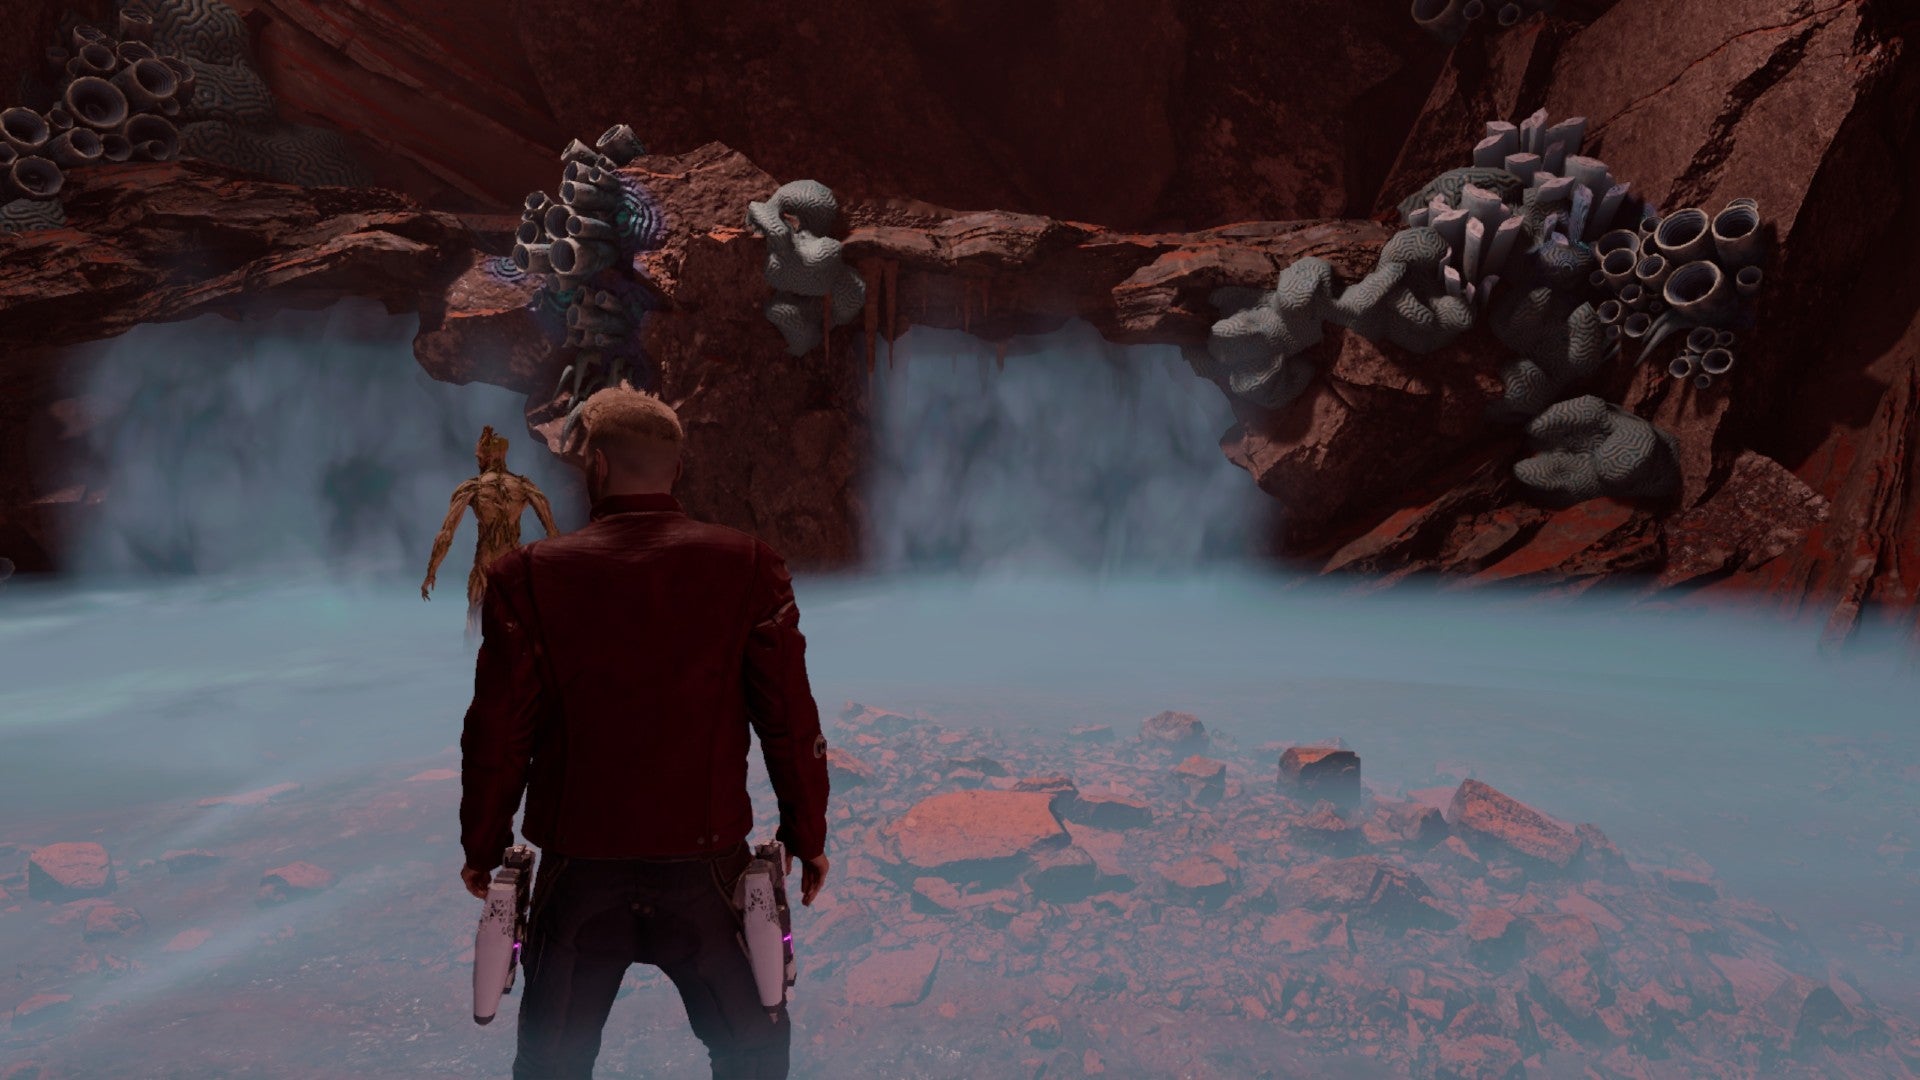 Star-Lord standing in the foggy cave with Groot just in front